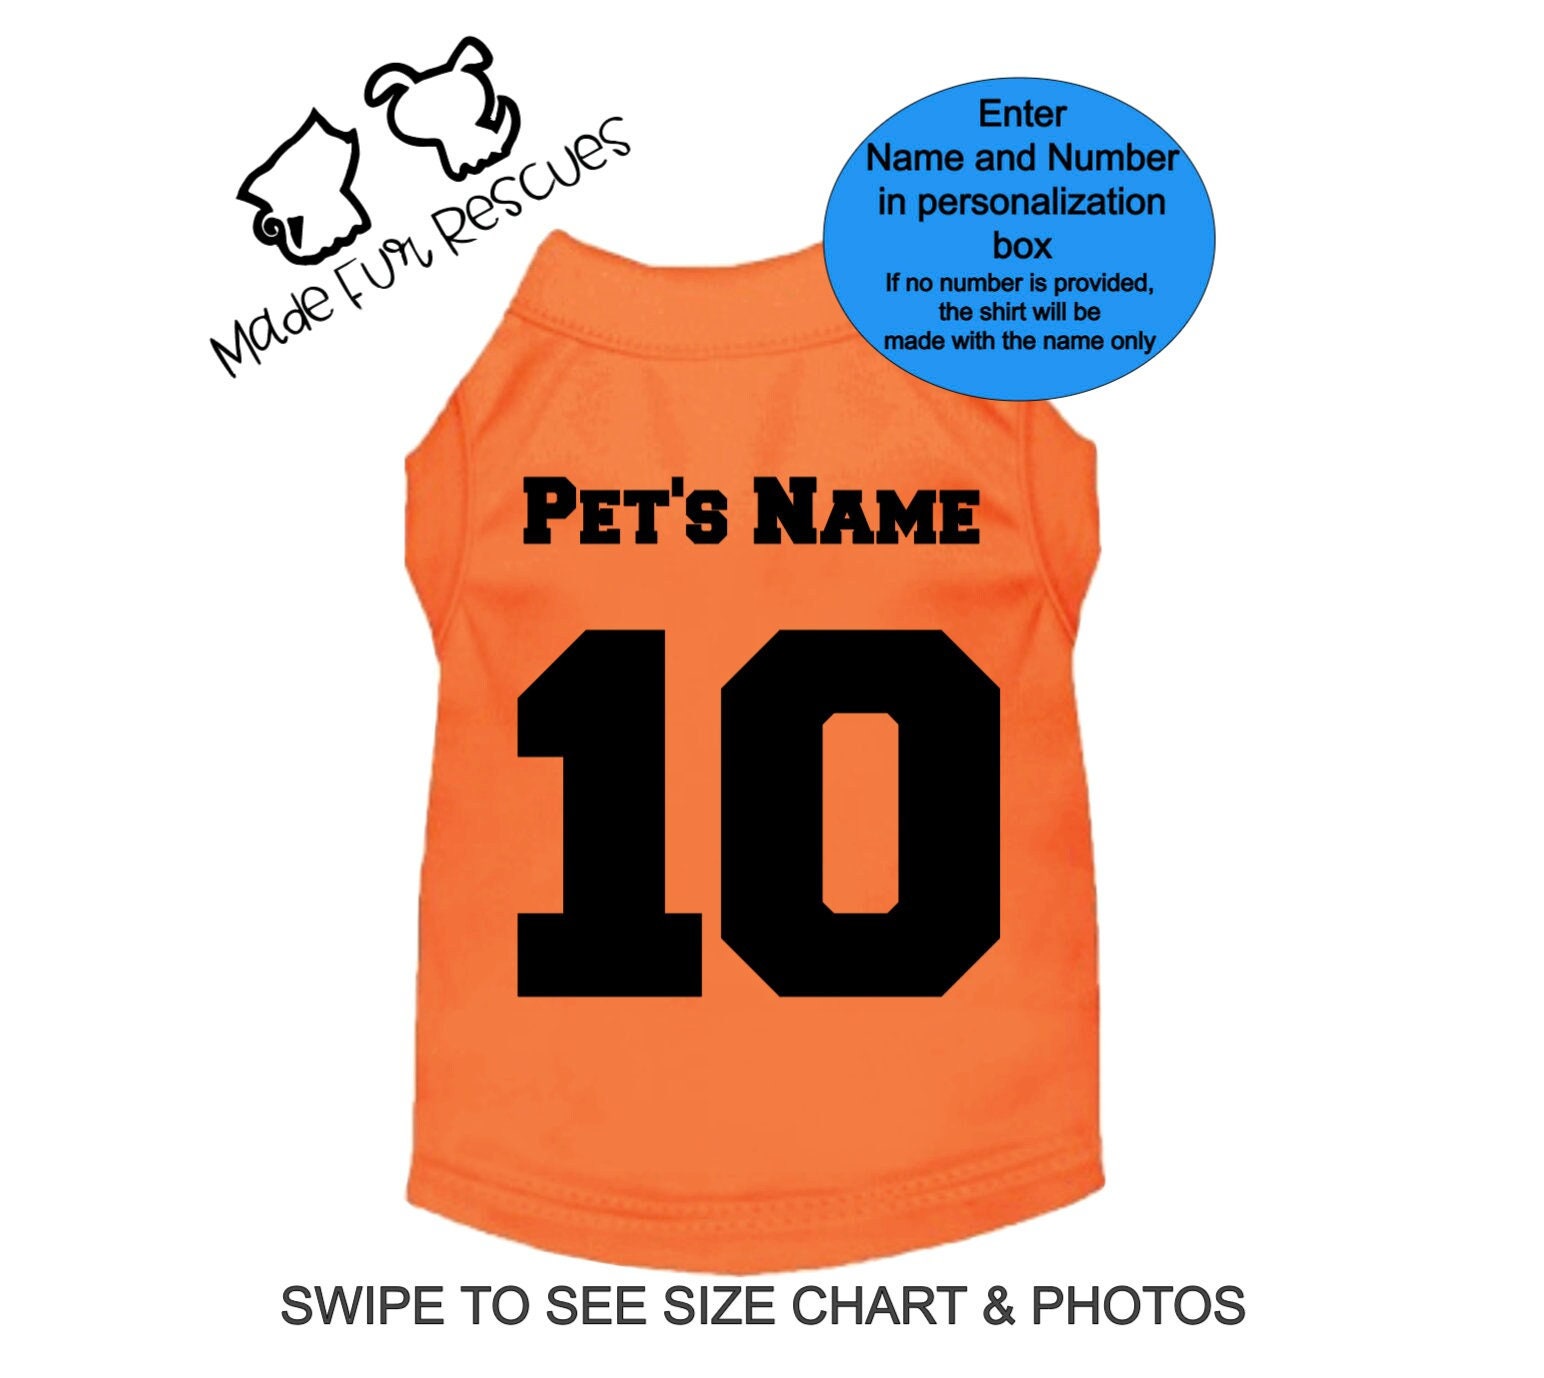 Dog Basketball Jersey Clothes Breathable T Shirt Dogs Costume Fashion  Clothes For Small Medium Dog, Check Out Today's Deals Now